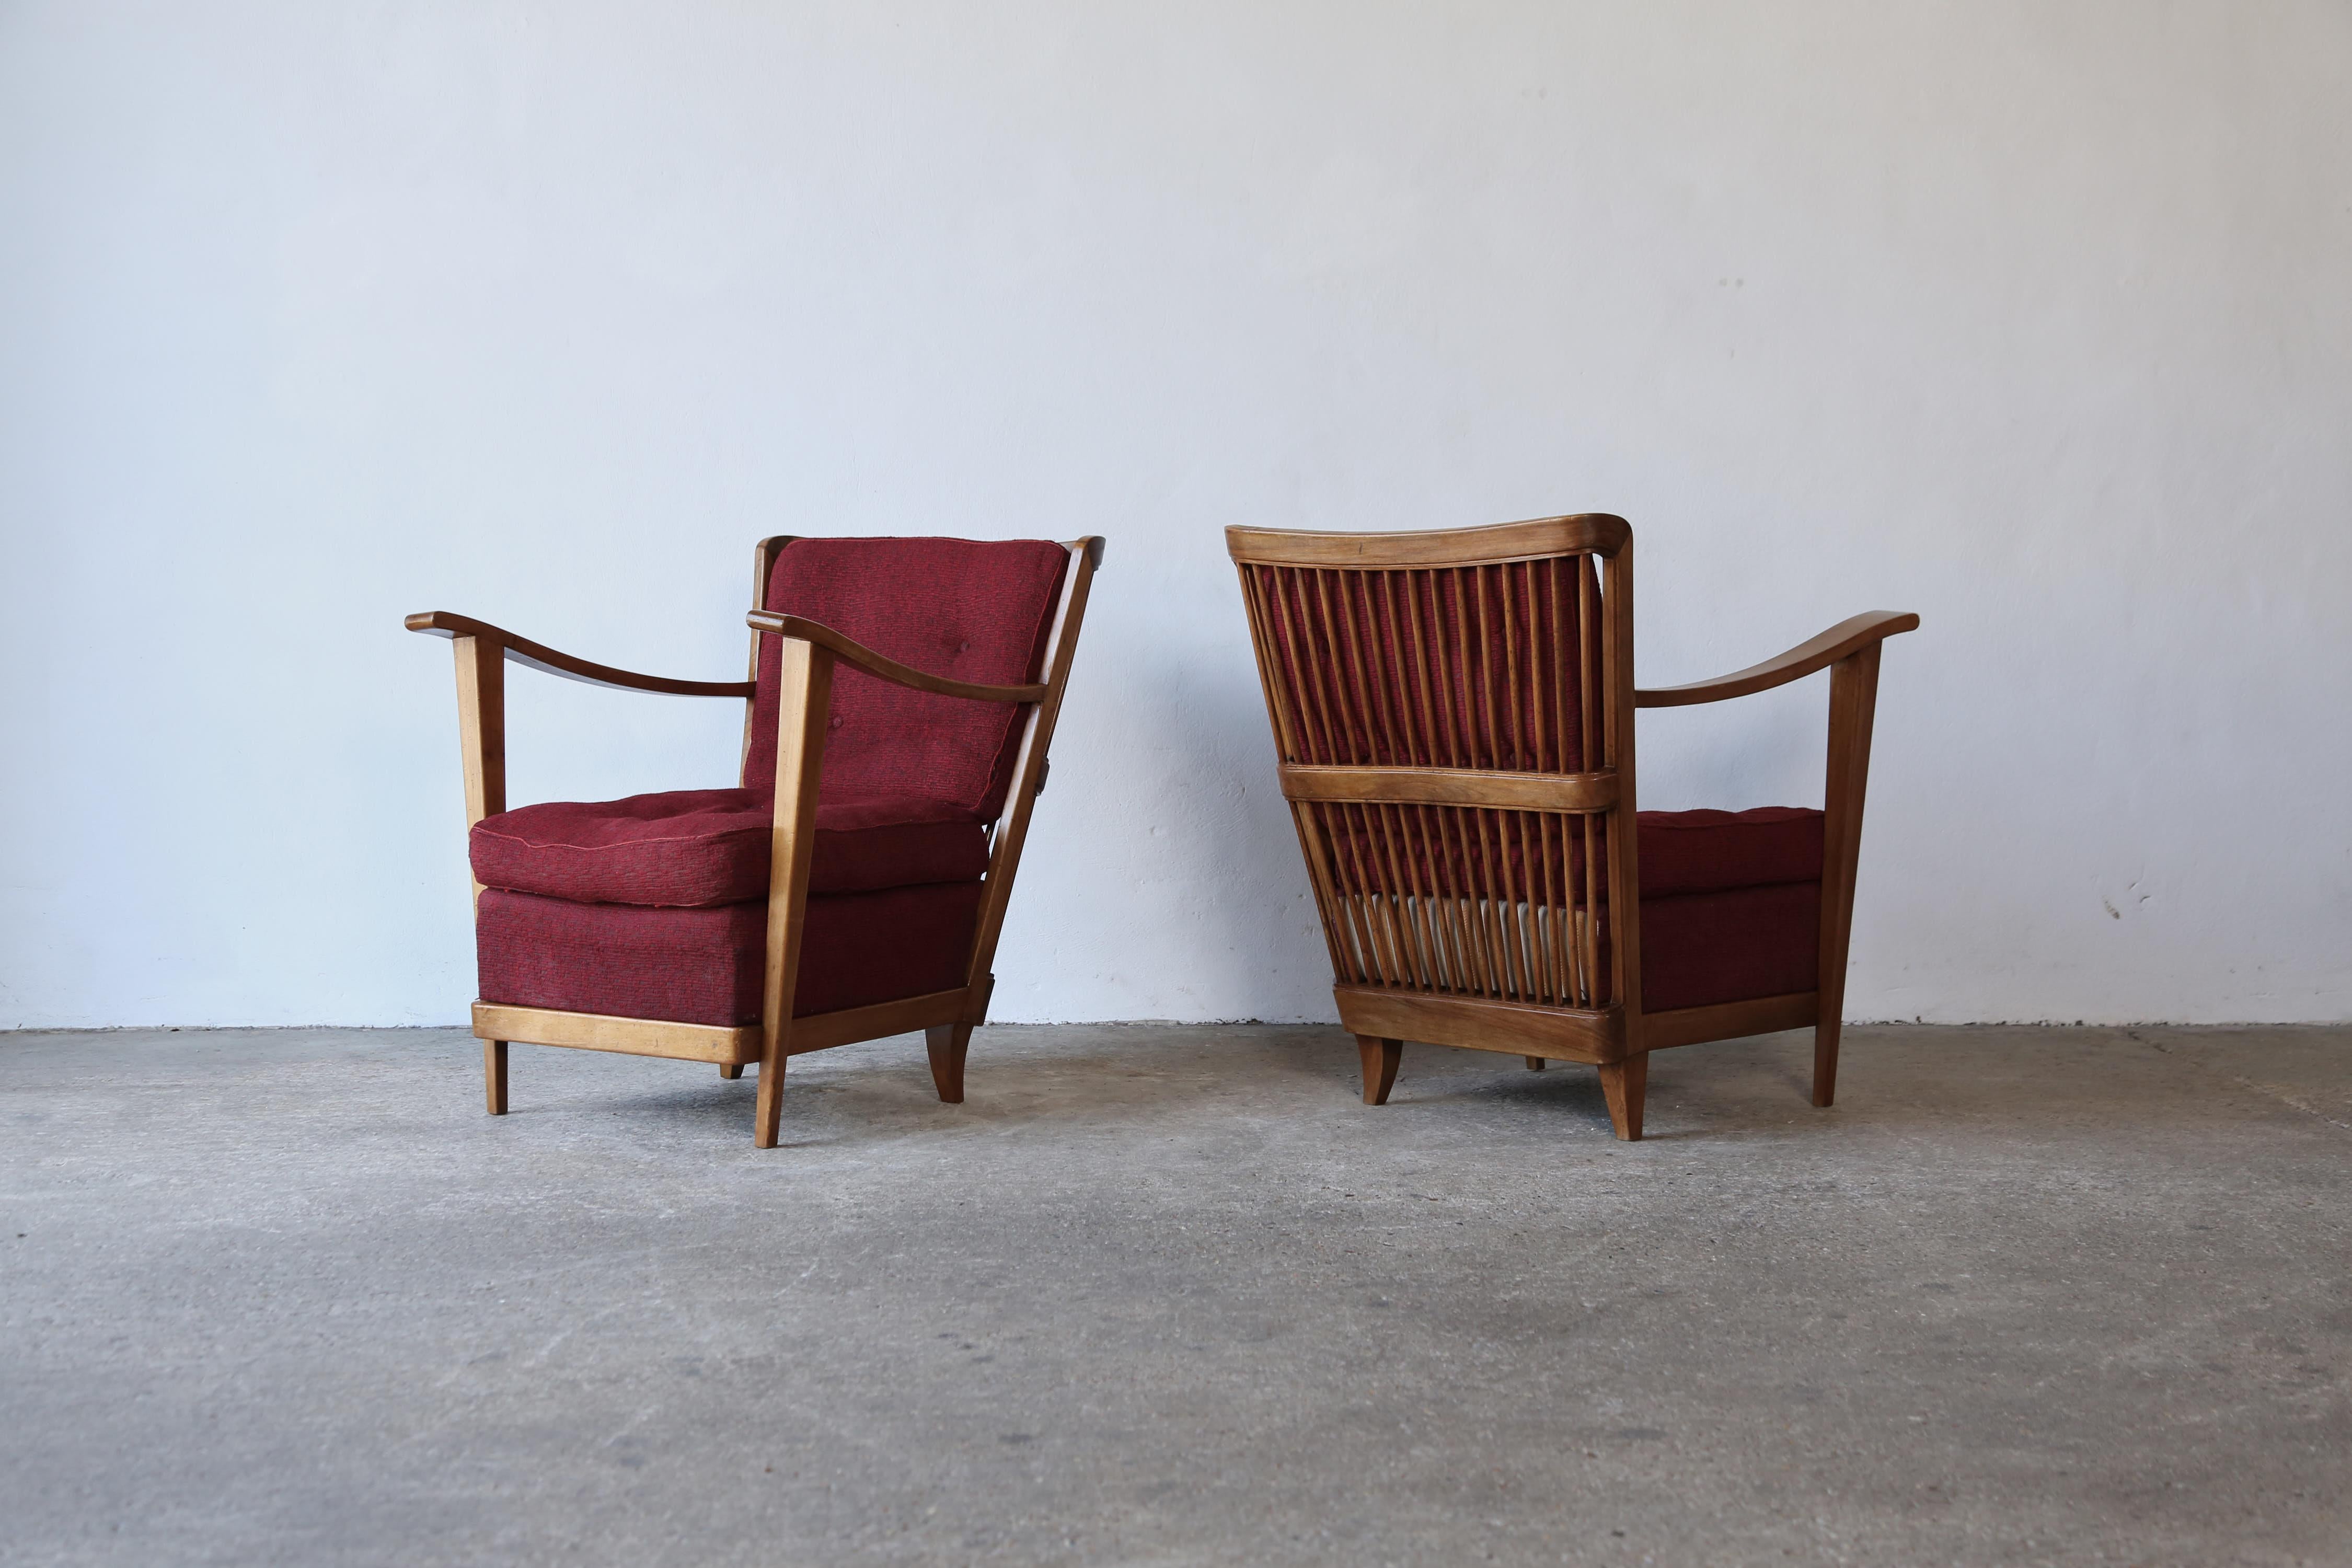 A wonderful and rare pair of armchairs by Maurizio Tempestini, Italy, 1950s.   The chair cushions require new fabric.    Fast shipping worldwide.
  
